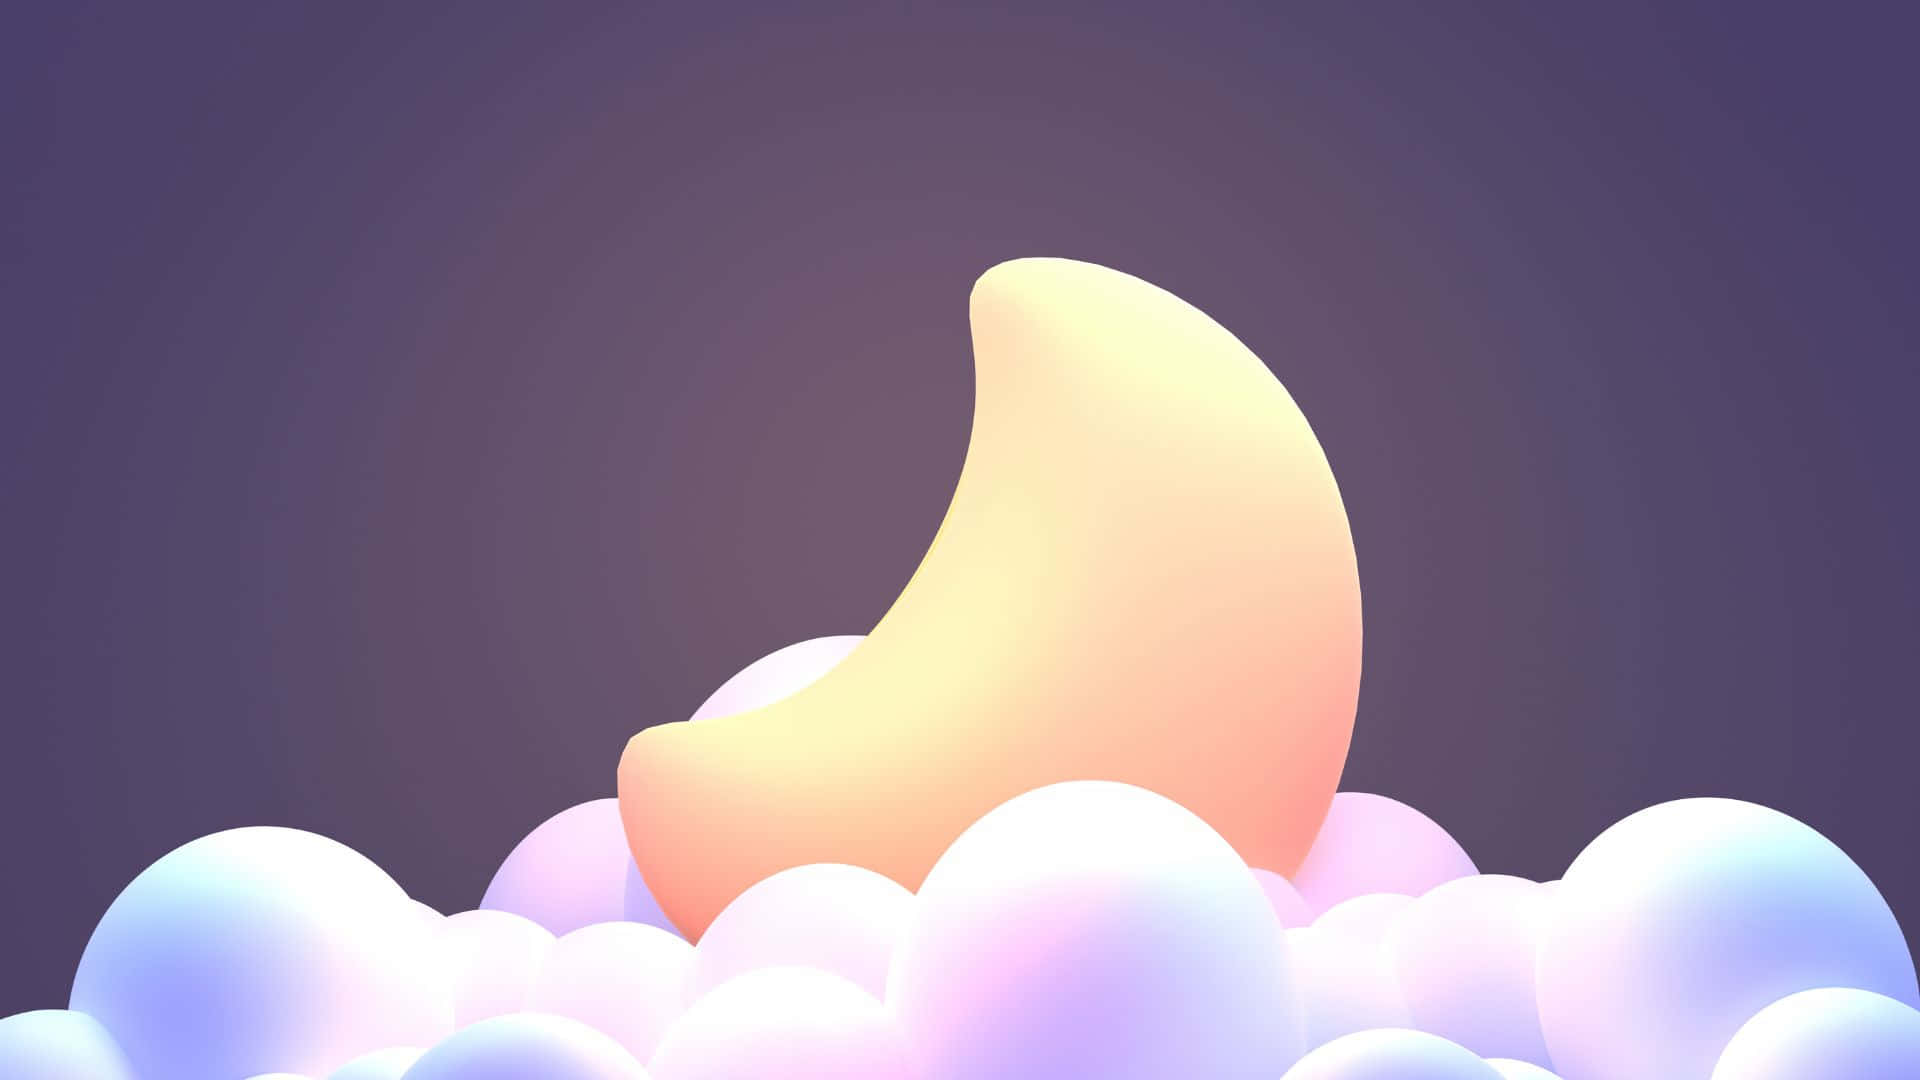 "A pastel-hued moon hanging in a starlit night sky" Wallpaper